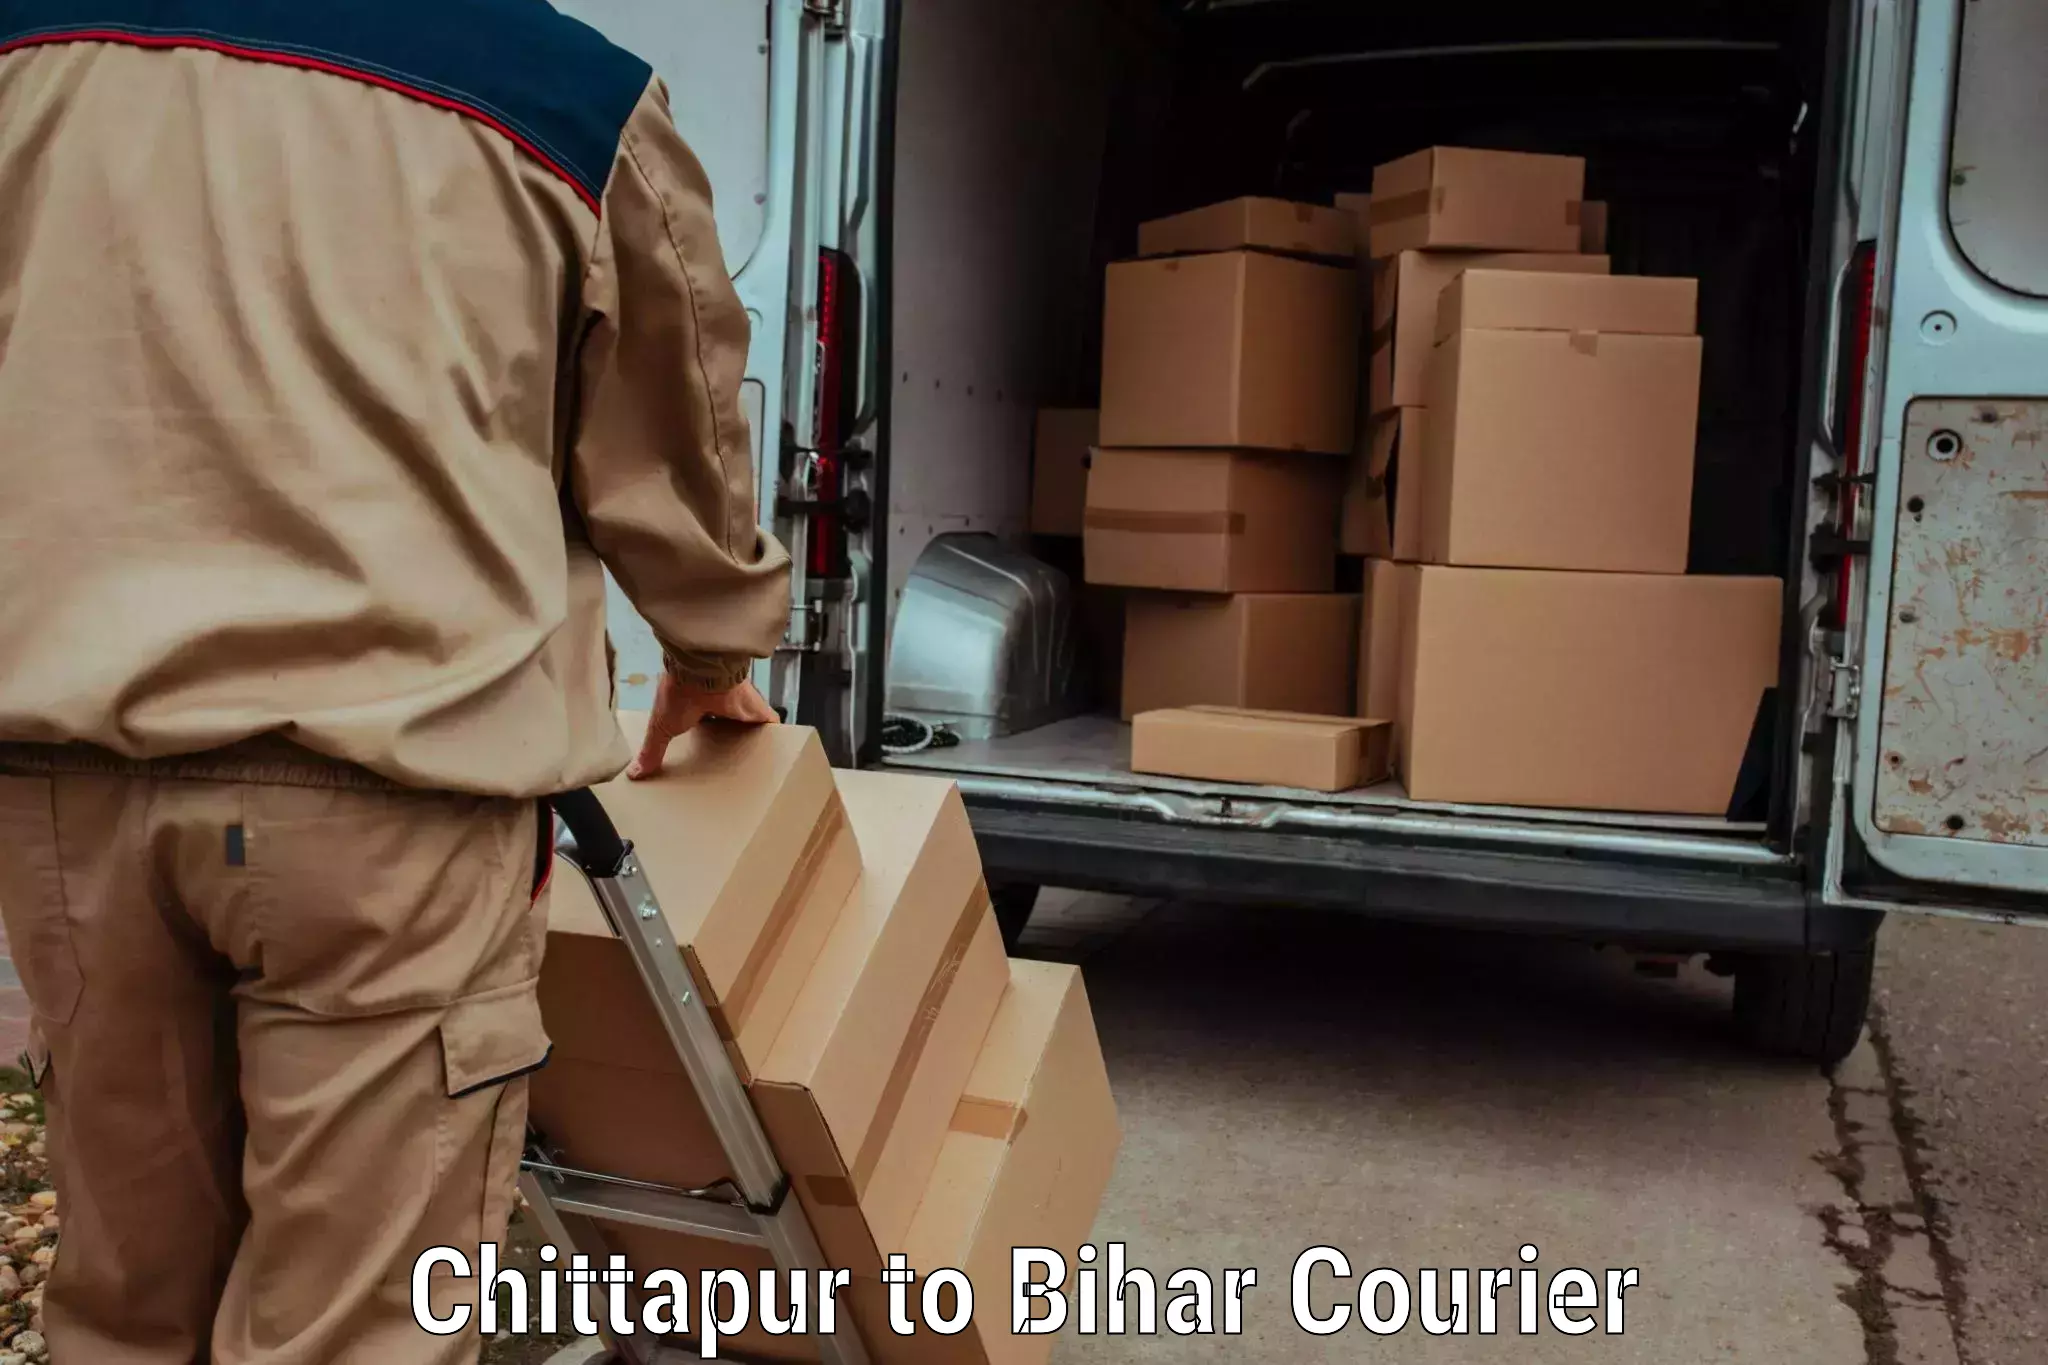 Luggage transport consulting Chittapur to Bihar